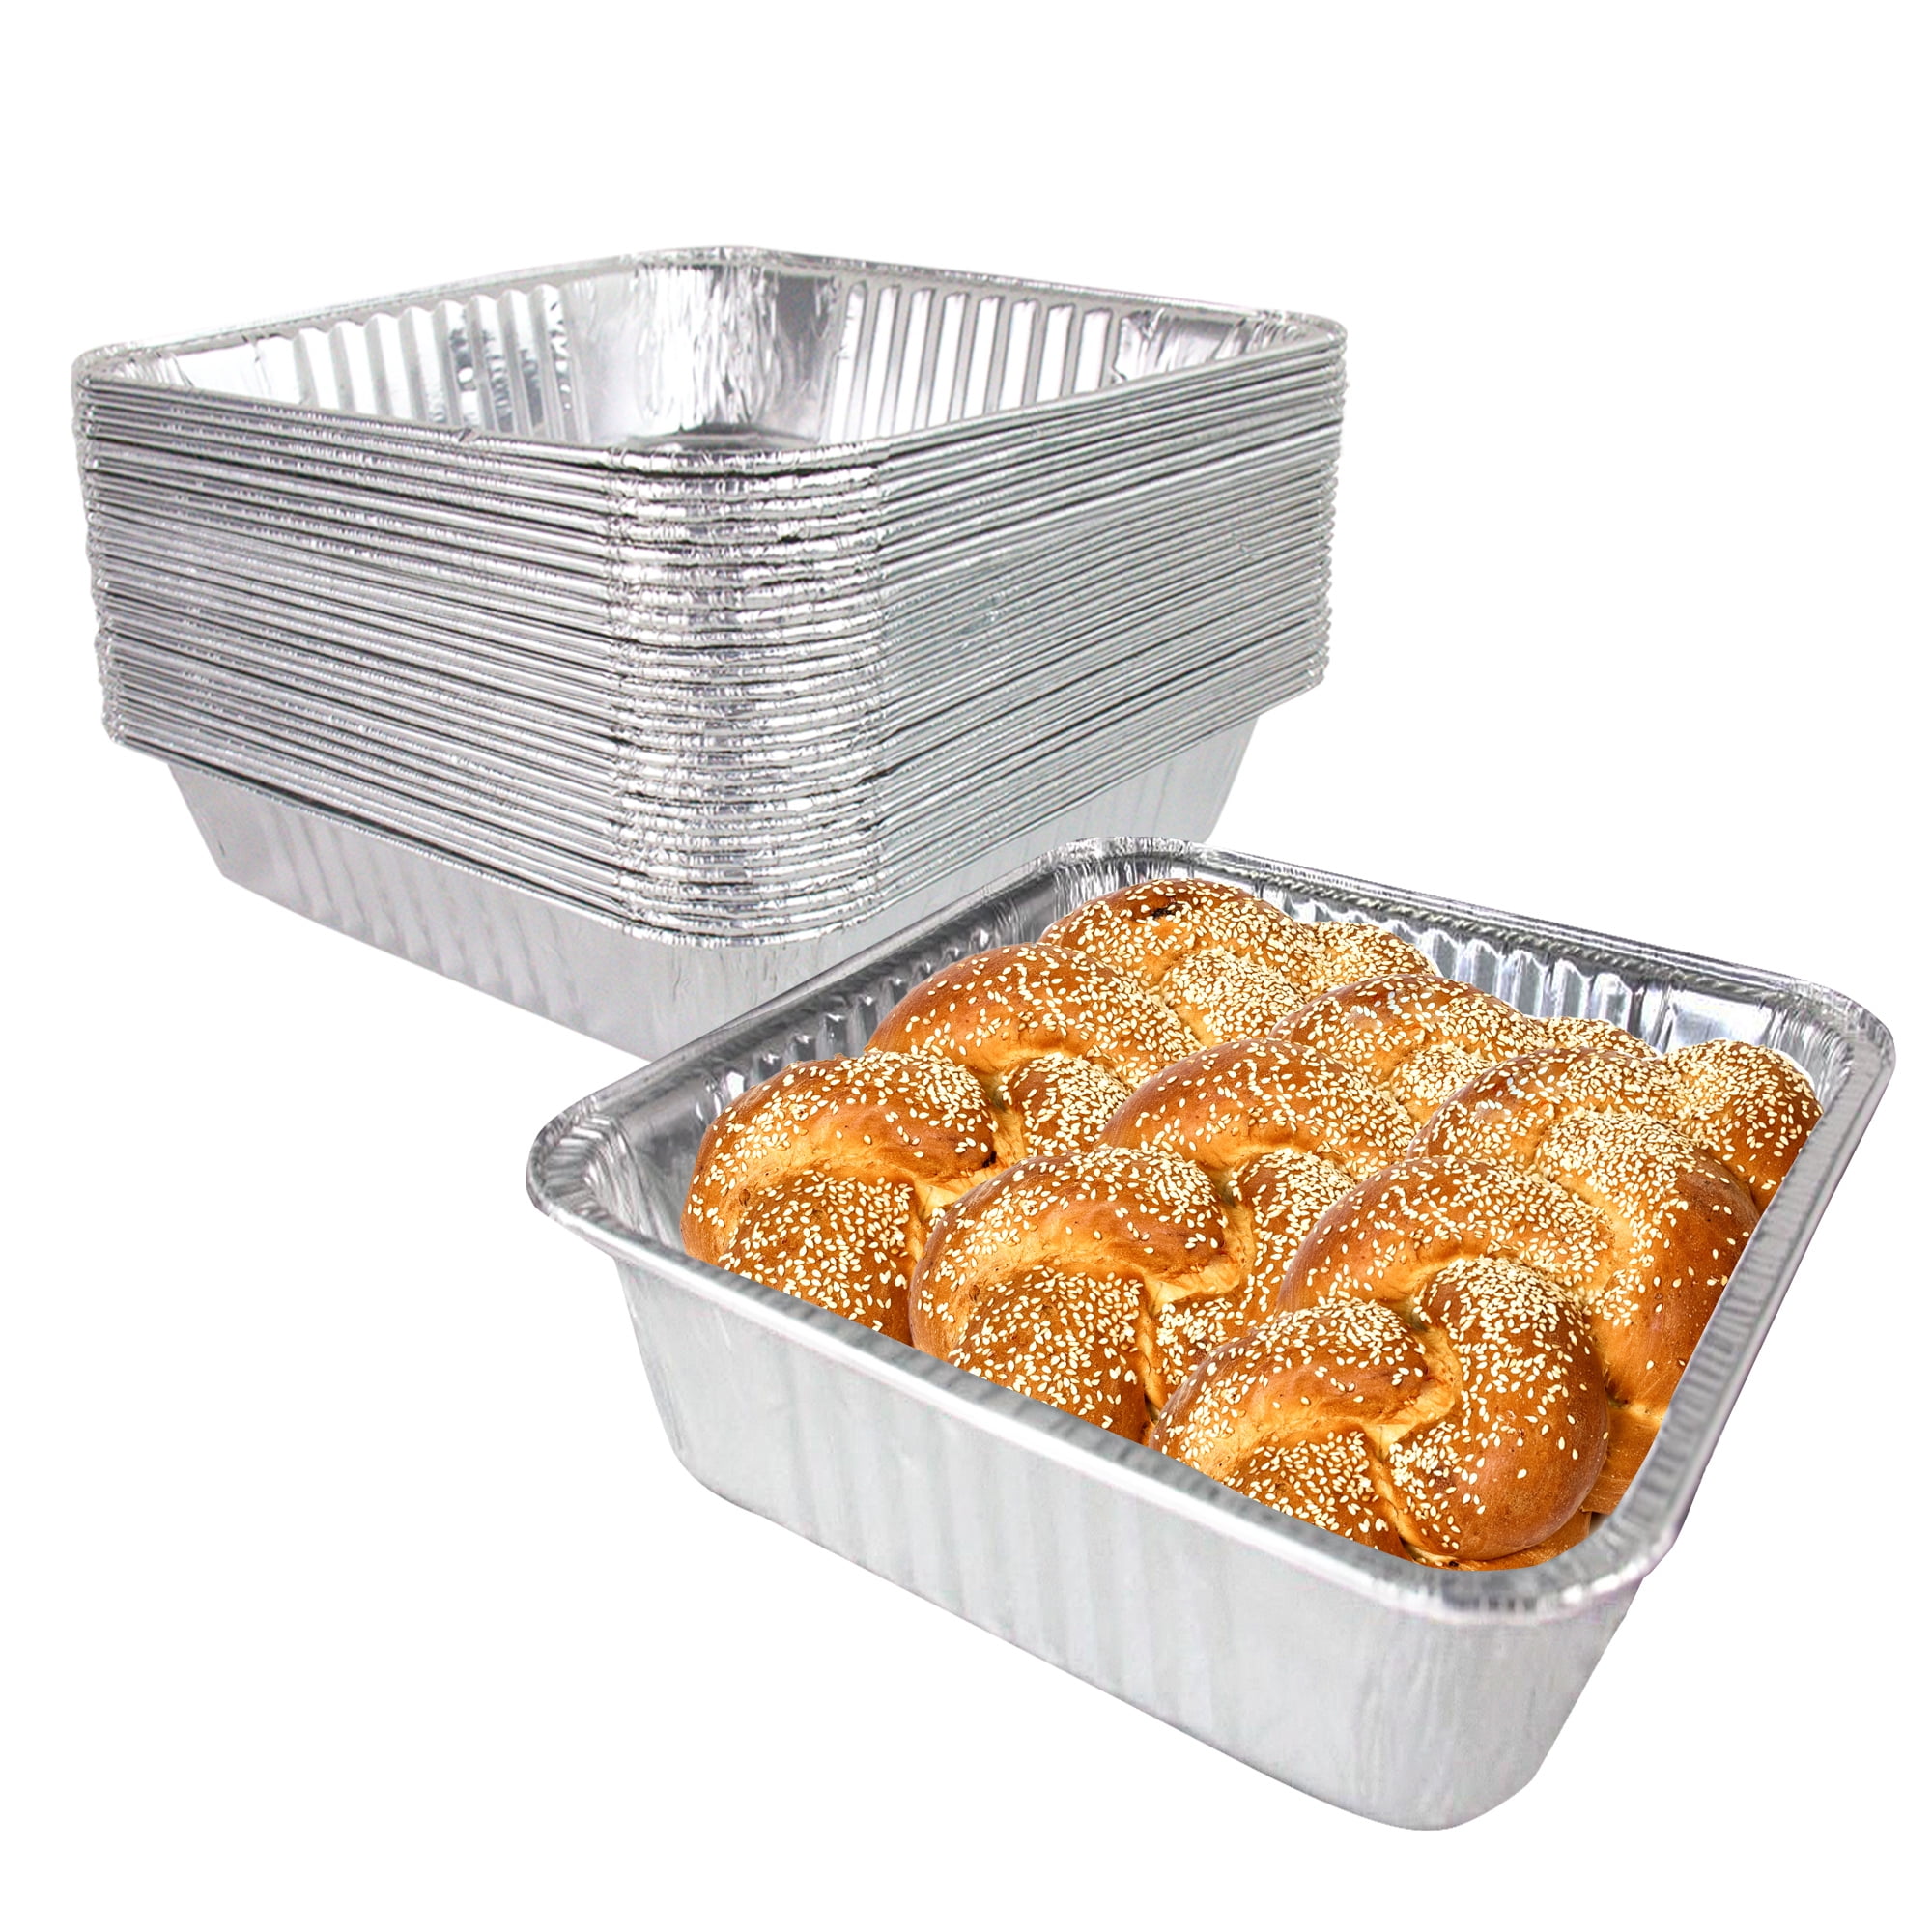 33 Pack] Square Foil Pans 8 inch - Aluminum Cake Pan / Baking Pans for  Reheating, Roasting, Grilling and Broiling, Disposable Food Container,  Catering Trays, Freezer and Oven Safe - Walmart.com